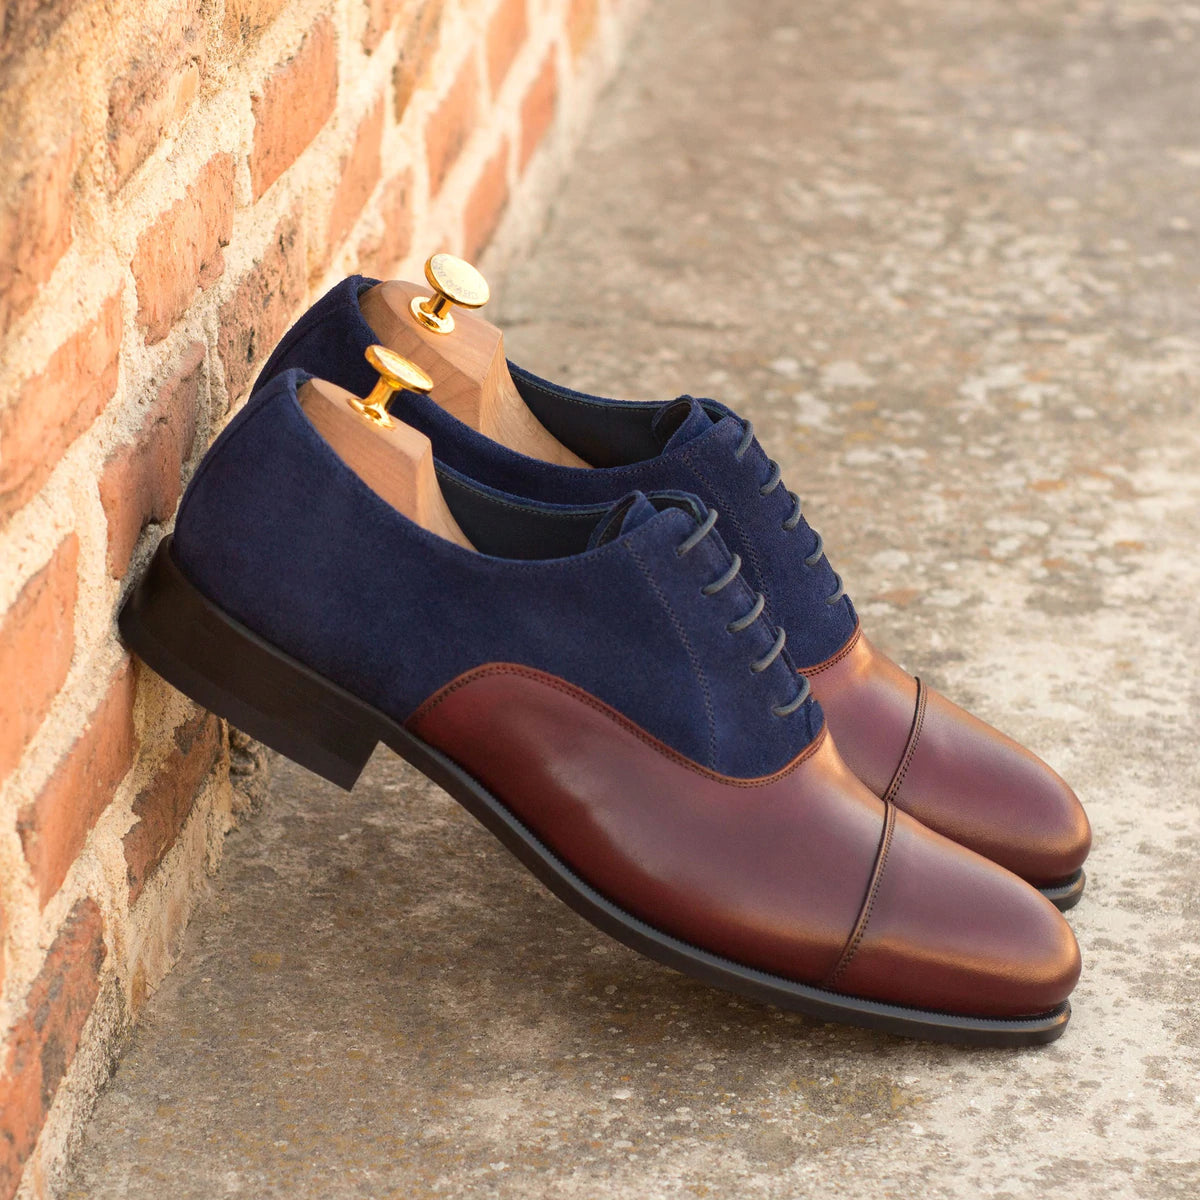 Toe cap oxford burgundy with luxury suede, formal shoes for men in Dubai.